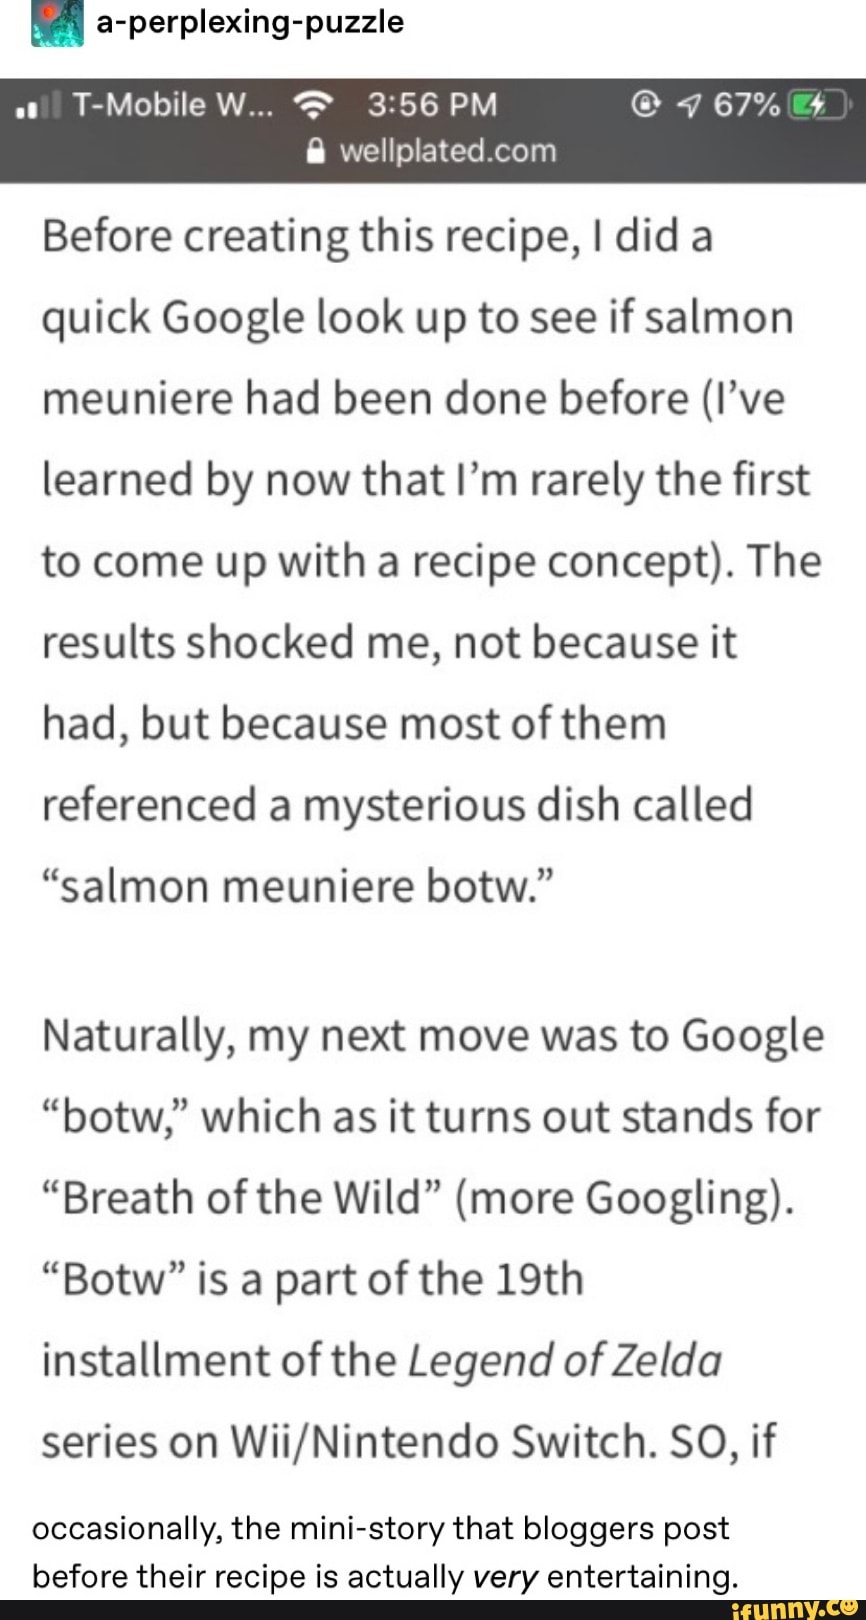 Nen A Perplexing Puzzle A Wellplated Com Before Creating This Recipe I Dida Quick Google Look Up To See If Salmon Meuniere Had Been Done Before I Ve Learned By Now That Im Rarely The First